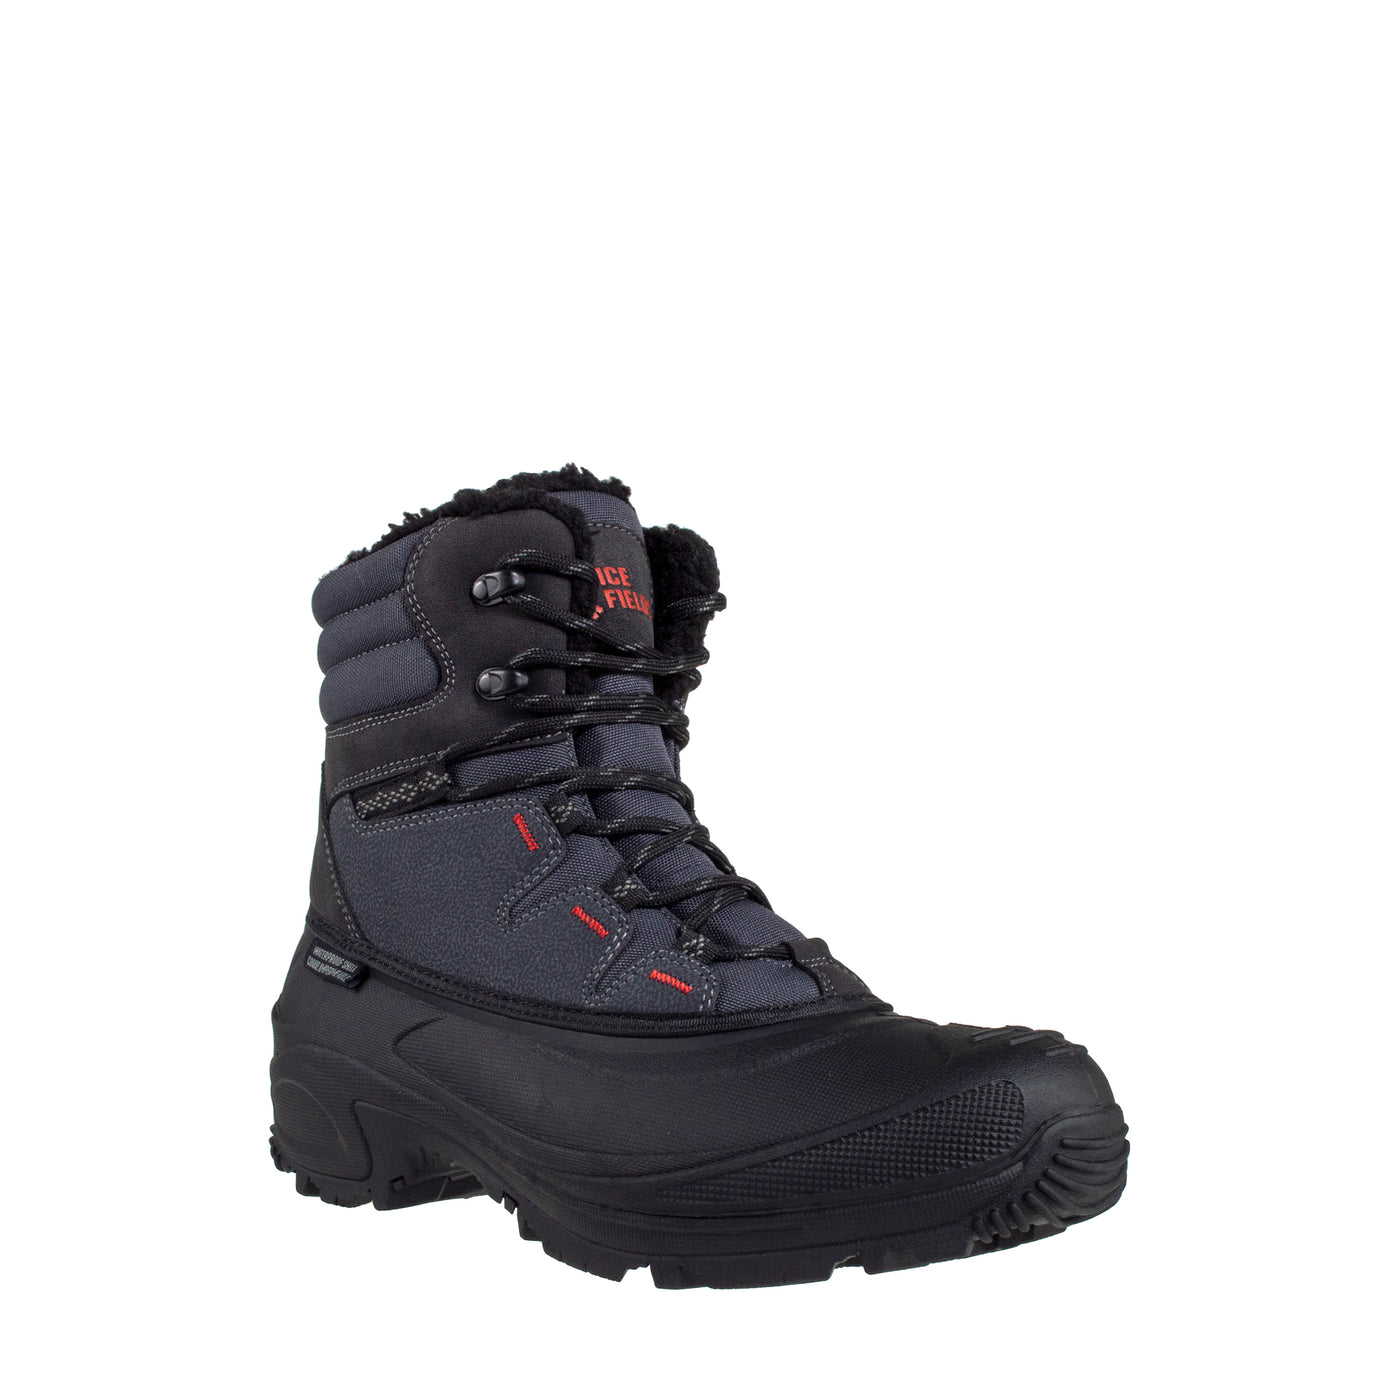 Men's Black Boot with Red Accents